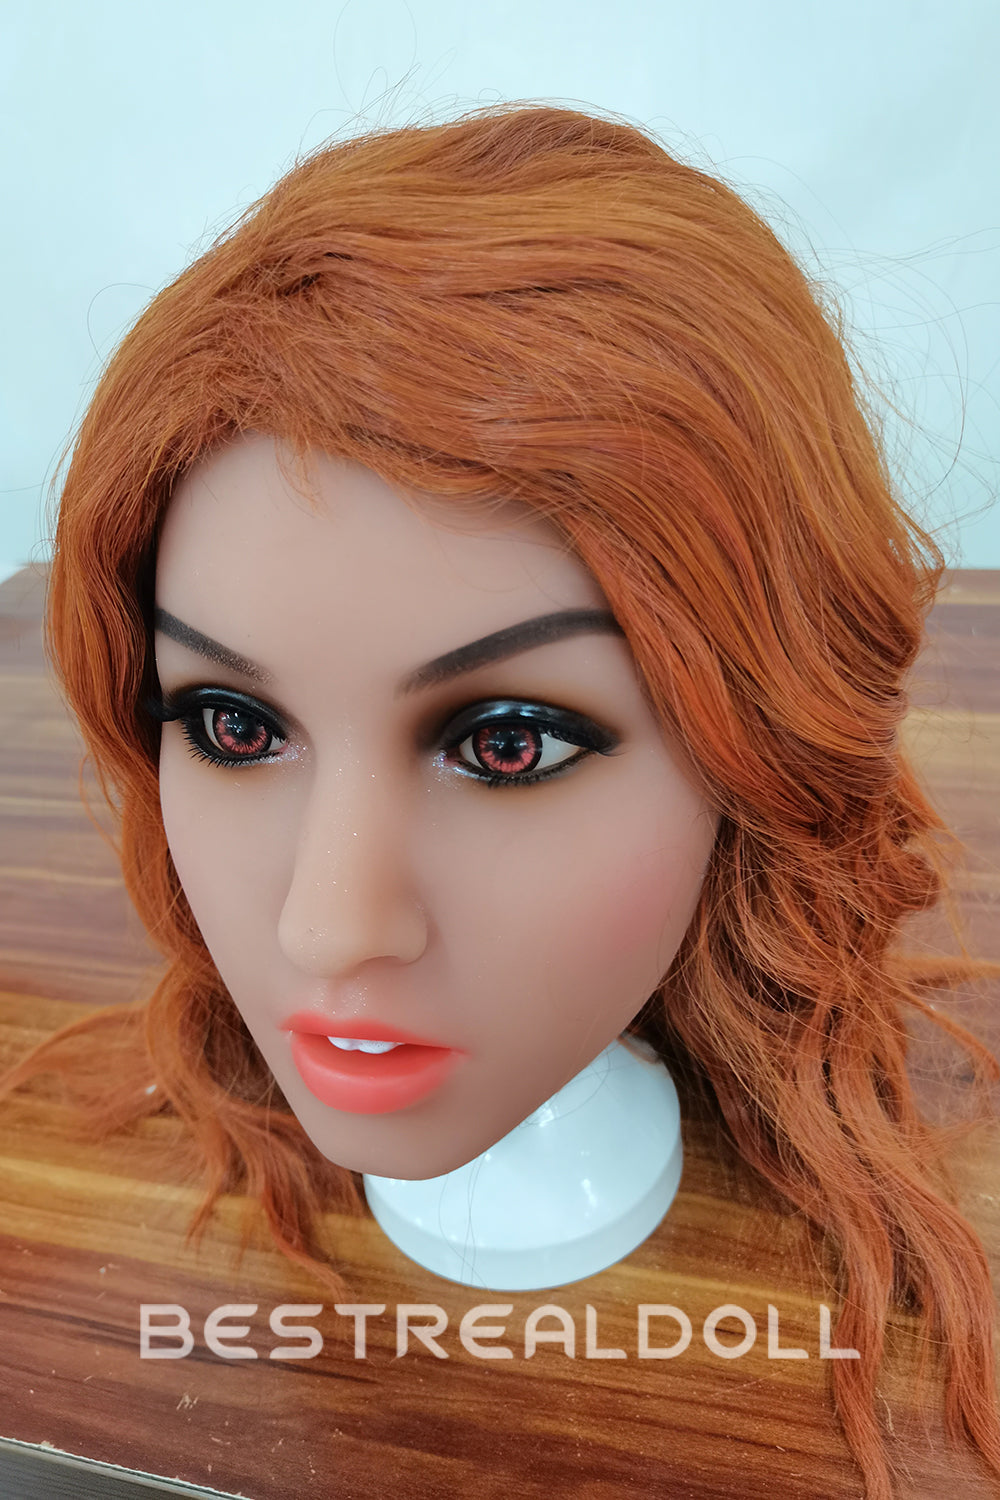 US Stock - 157cm Edeny TPE Transgender Sex Doll Realistic Small Breasts Lesbian Doll Orange Hair Shemale Love Doll